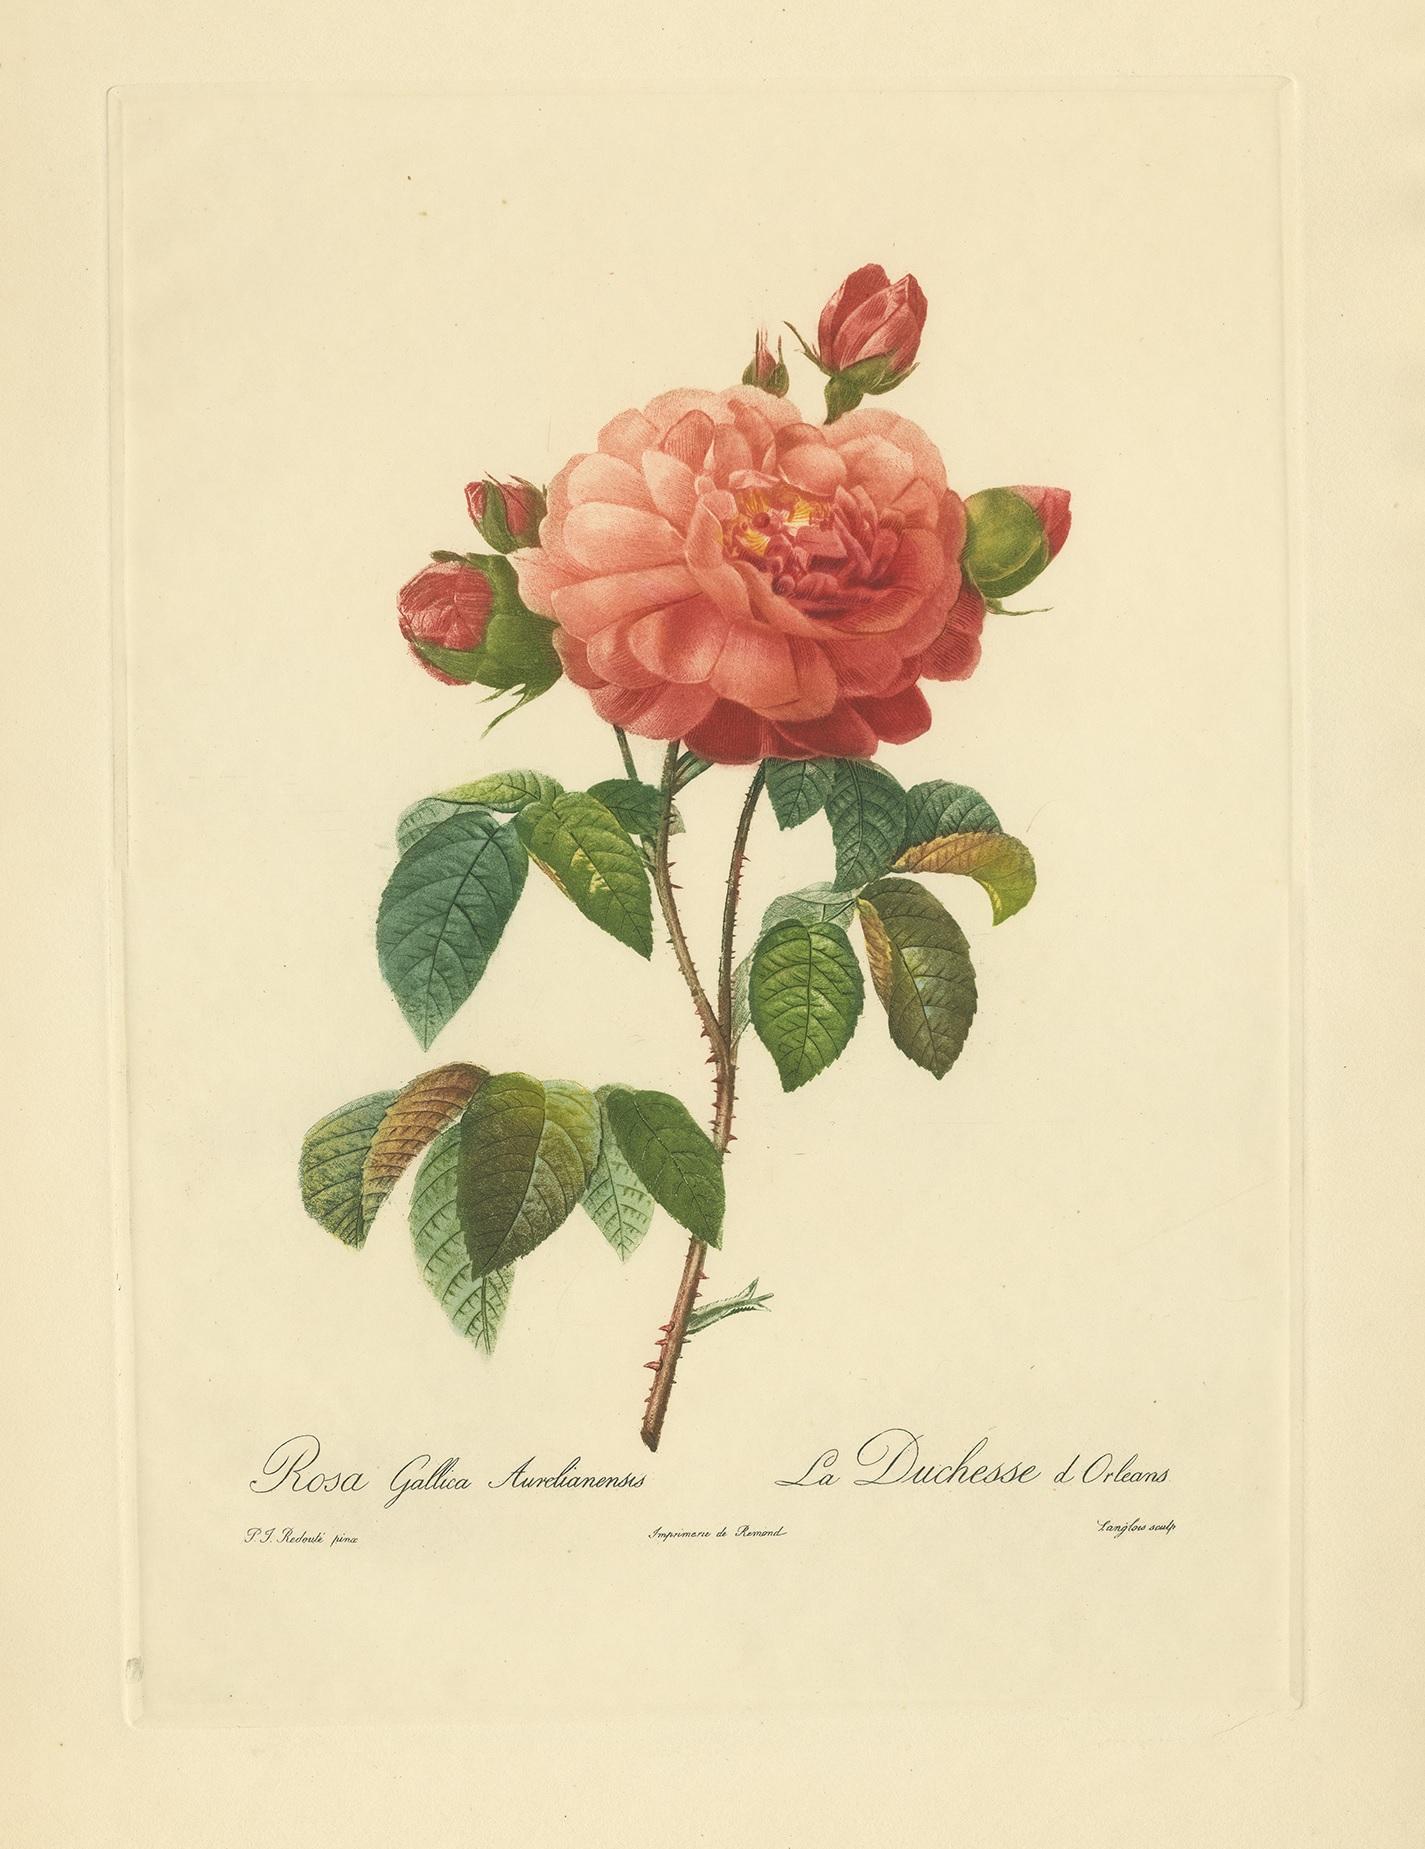 Beautiful botanical print made after P.J. Redouté, published by the Paris Etching Society. Pierre-Joseph Redoute is regarded as the greatest botanical artist. His portrayals of roses, flowers and fruit are rightly regarded as classics to this day